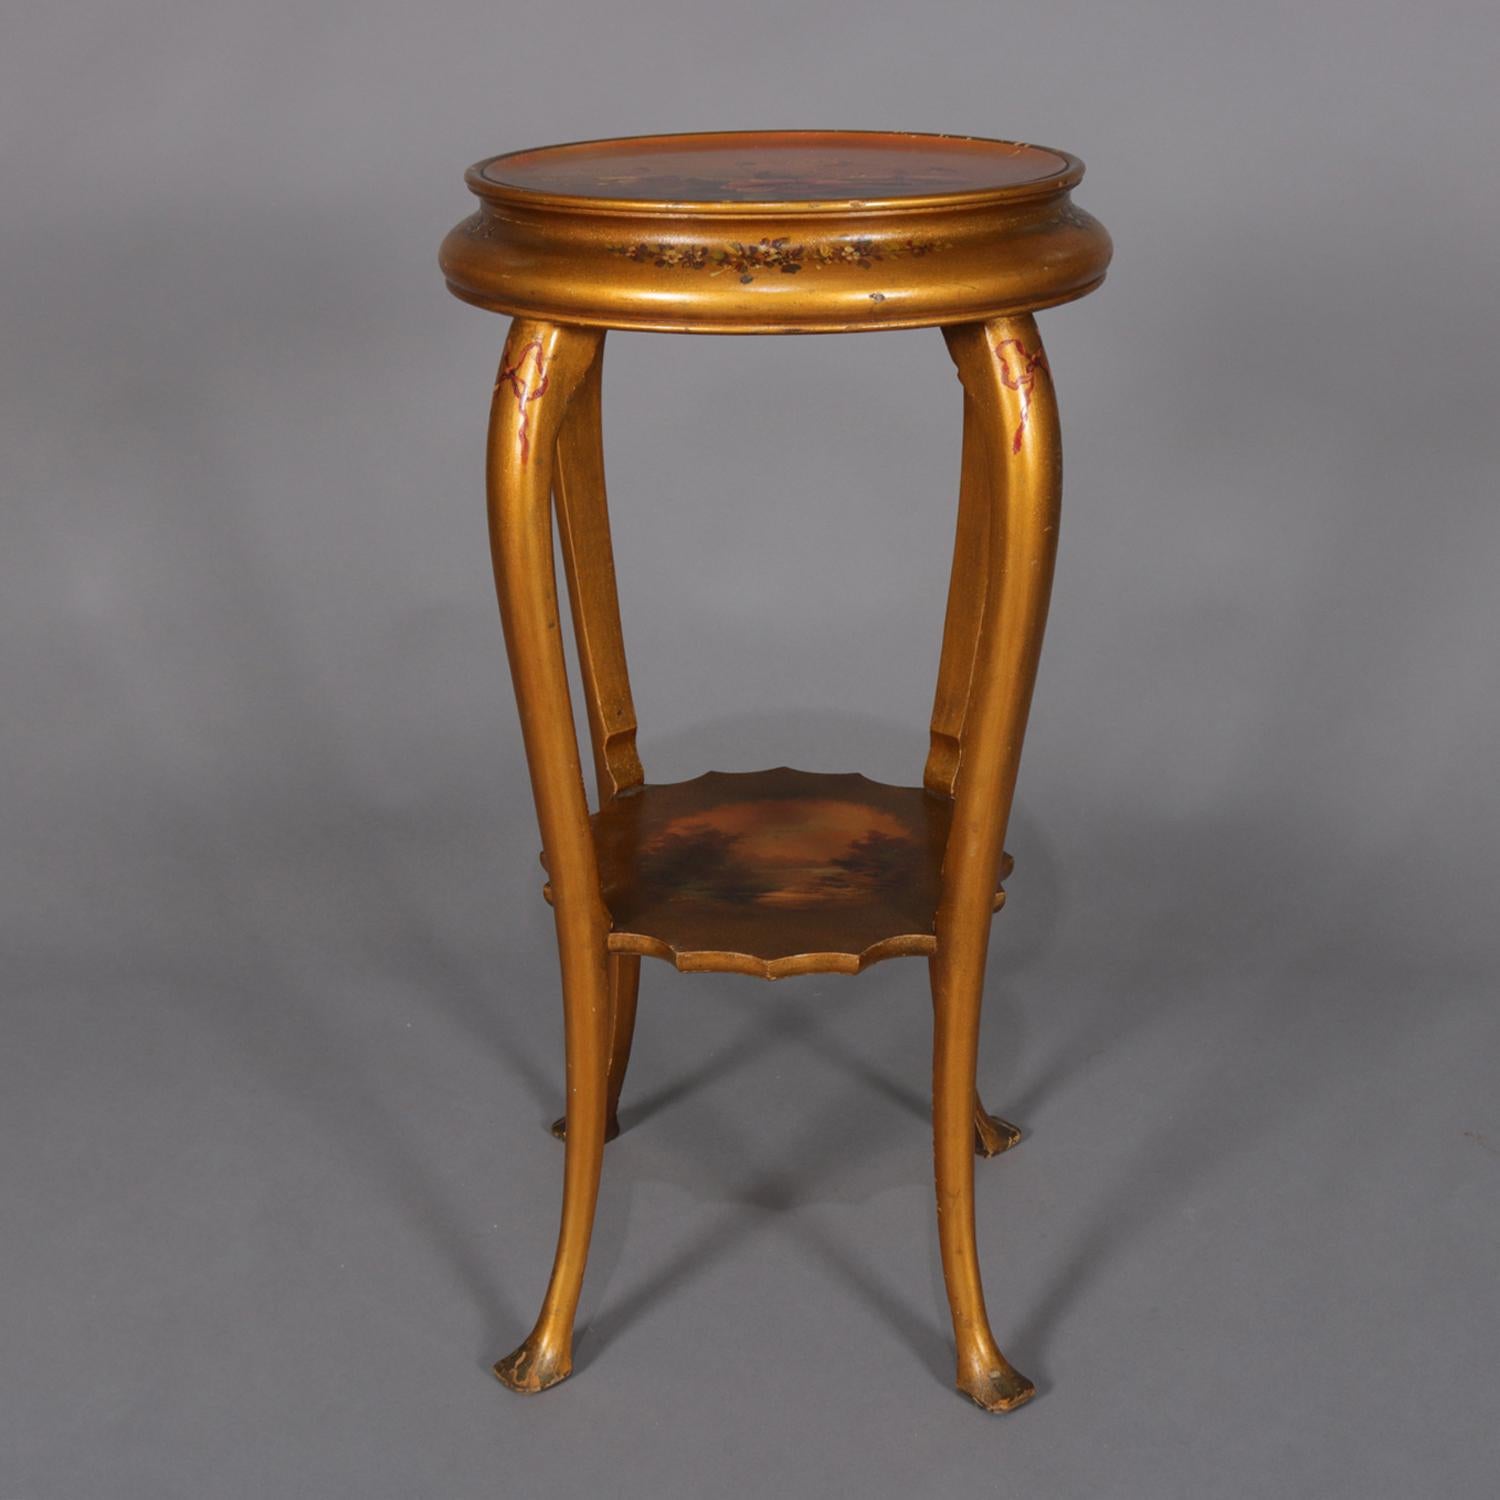 Vernis Martin Hand-Painted Landscape and Floral Giltwood Plant Stand, circa 1900 4